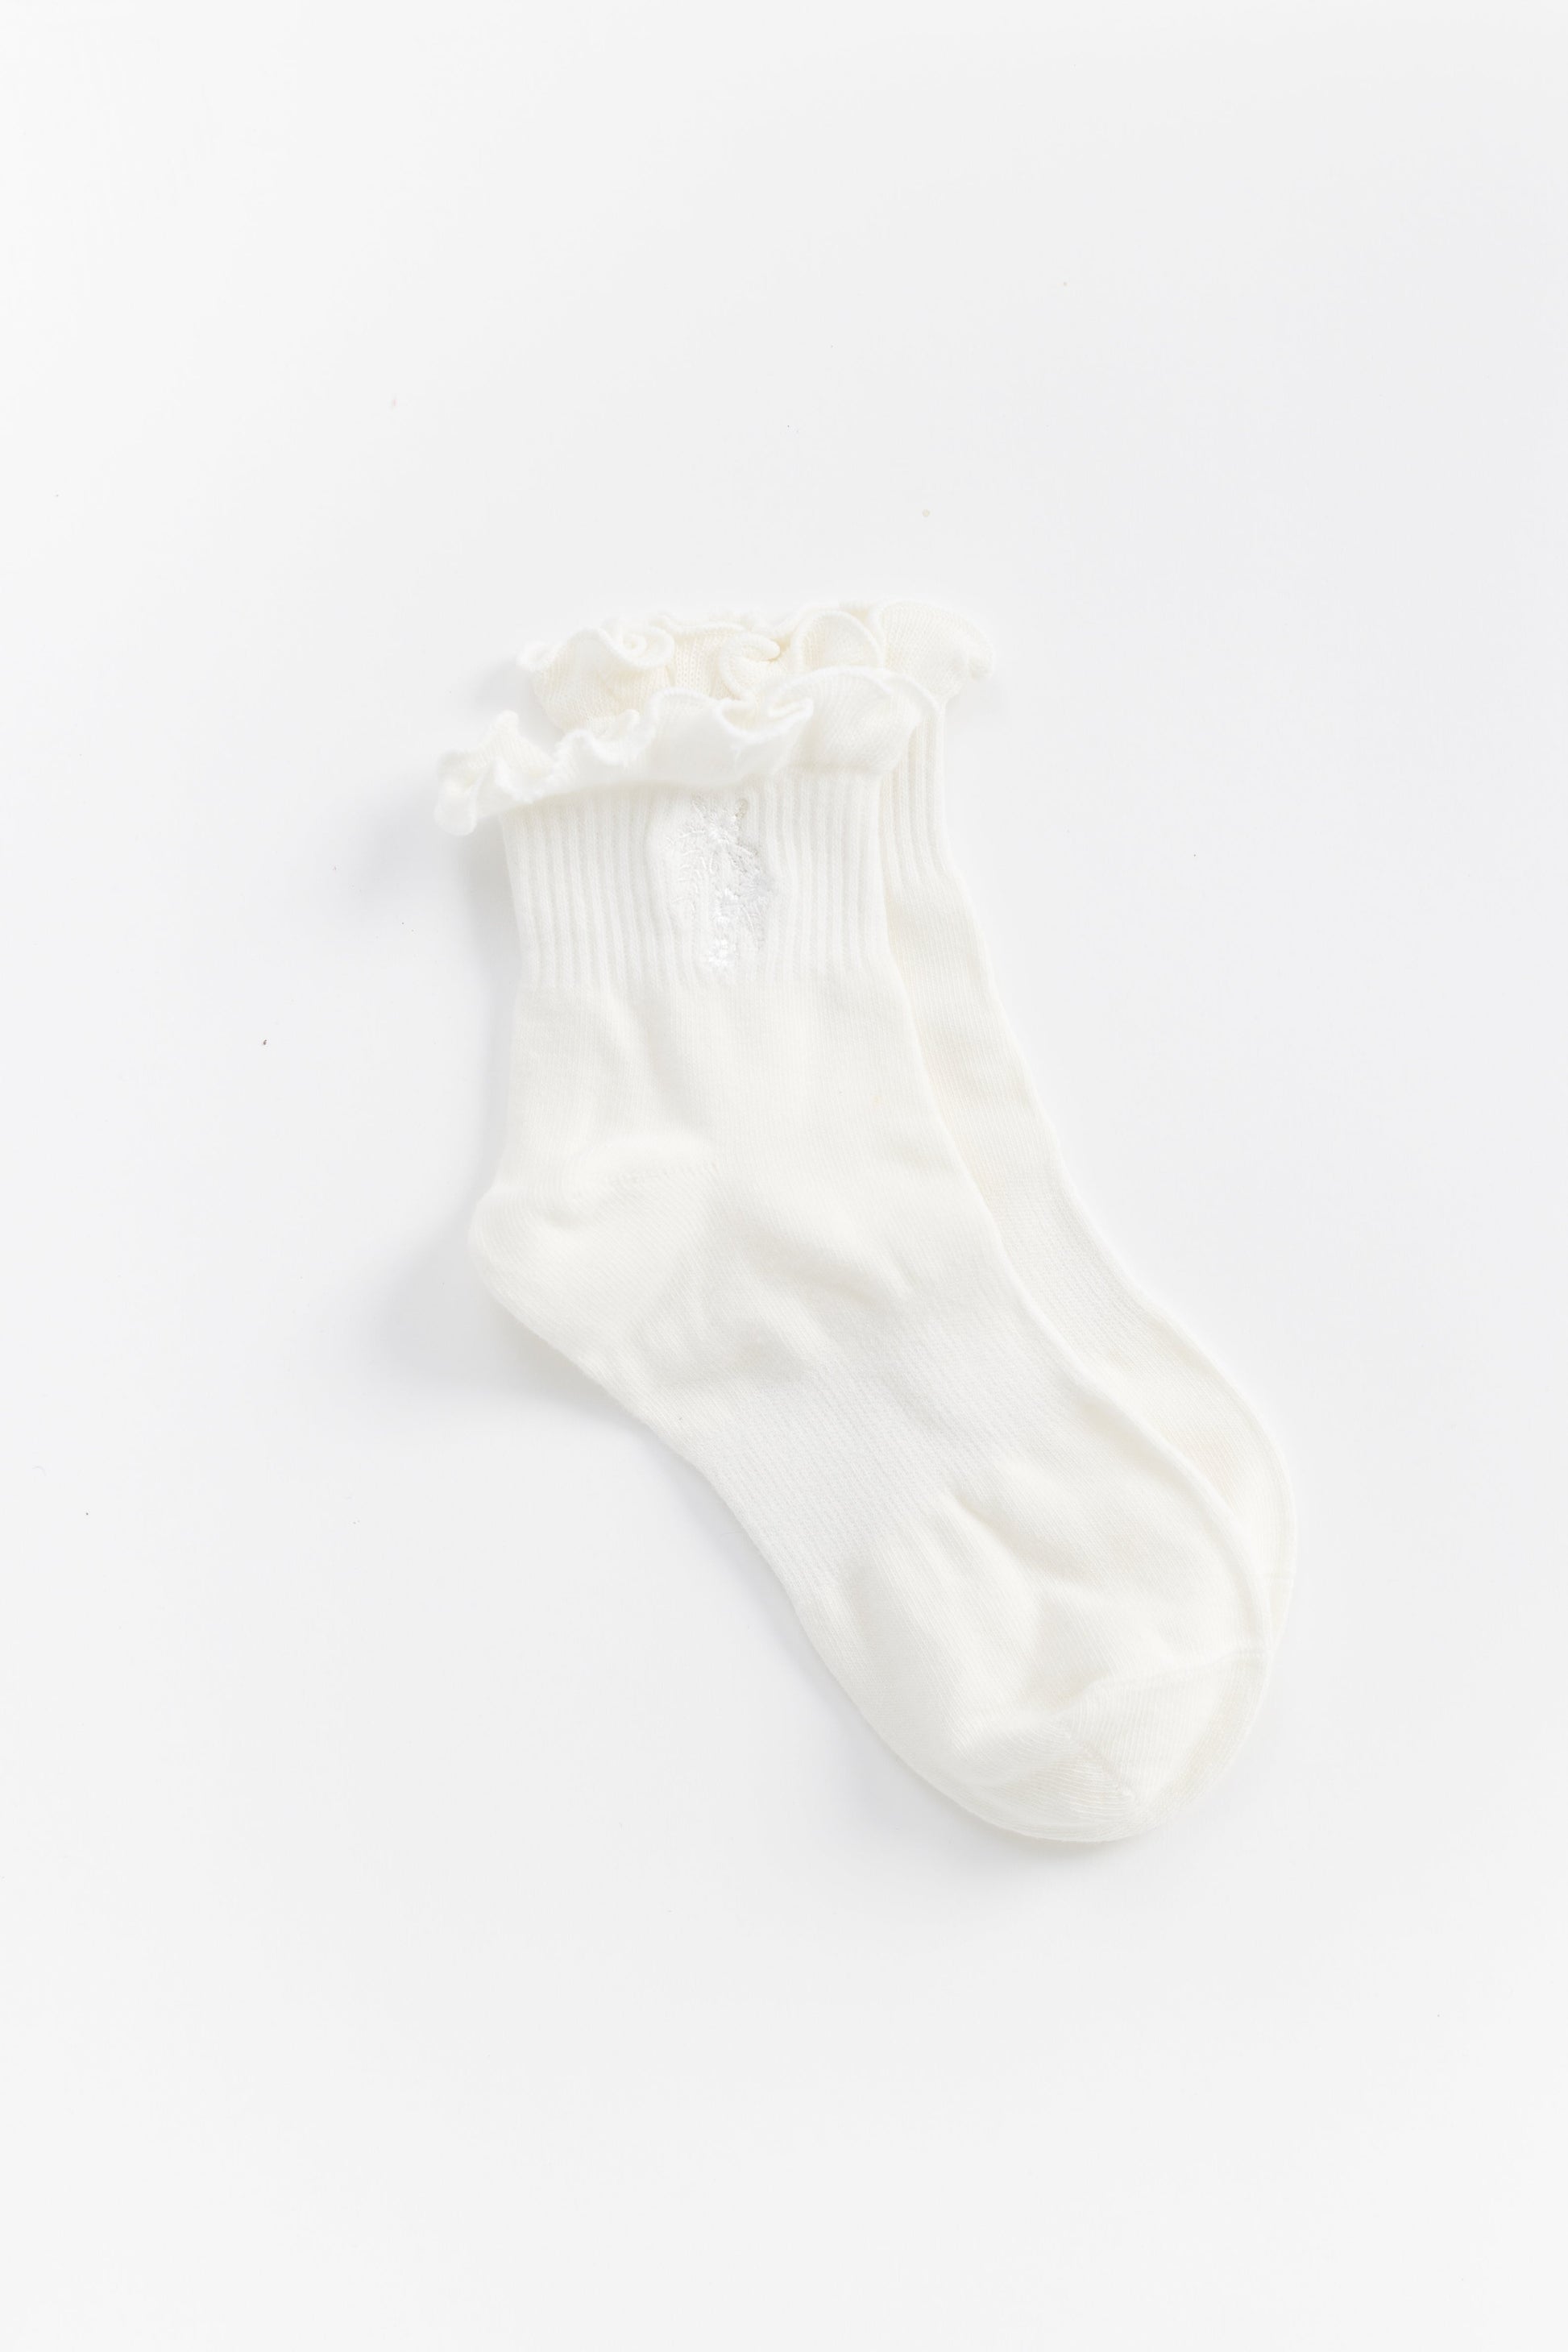 Field of Flowers Embroidered Ruffle Sock WOMEN'S SOCKS Cove Accessories 